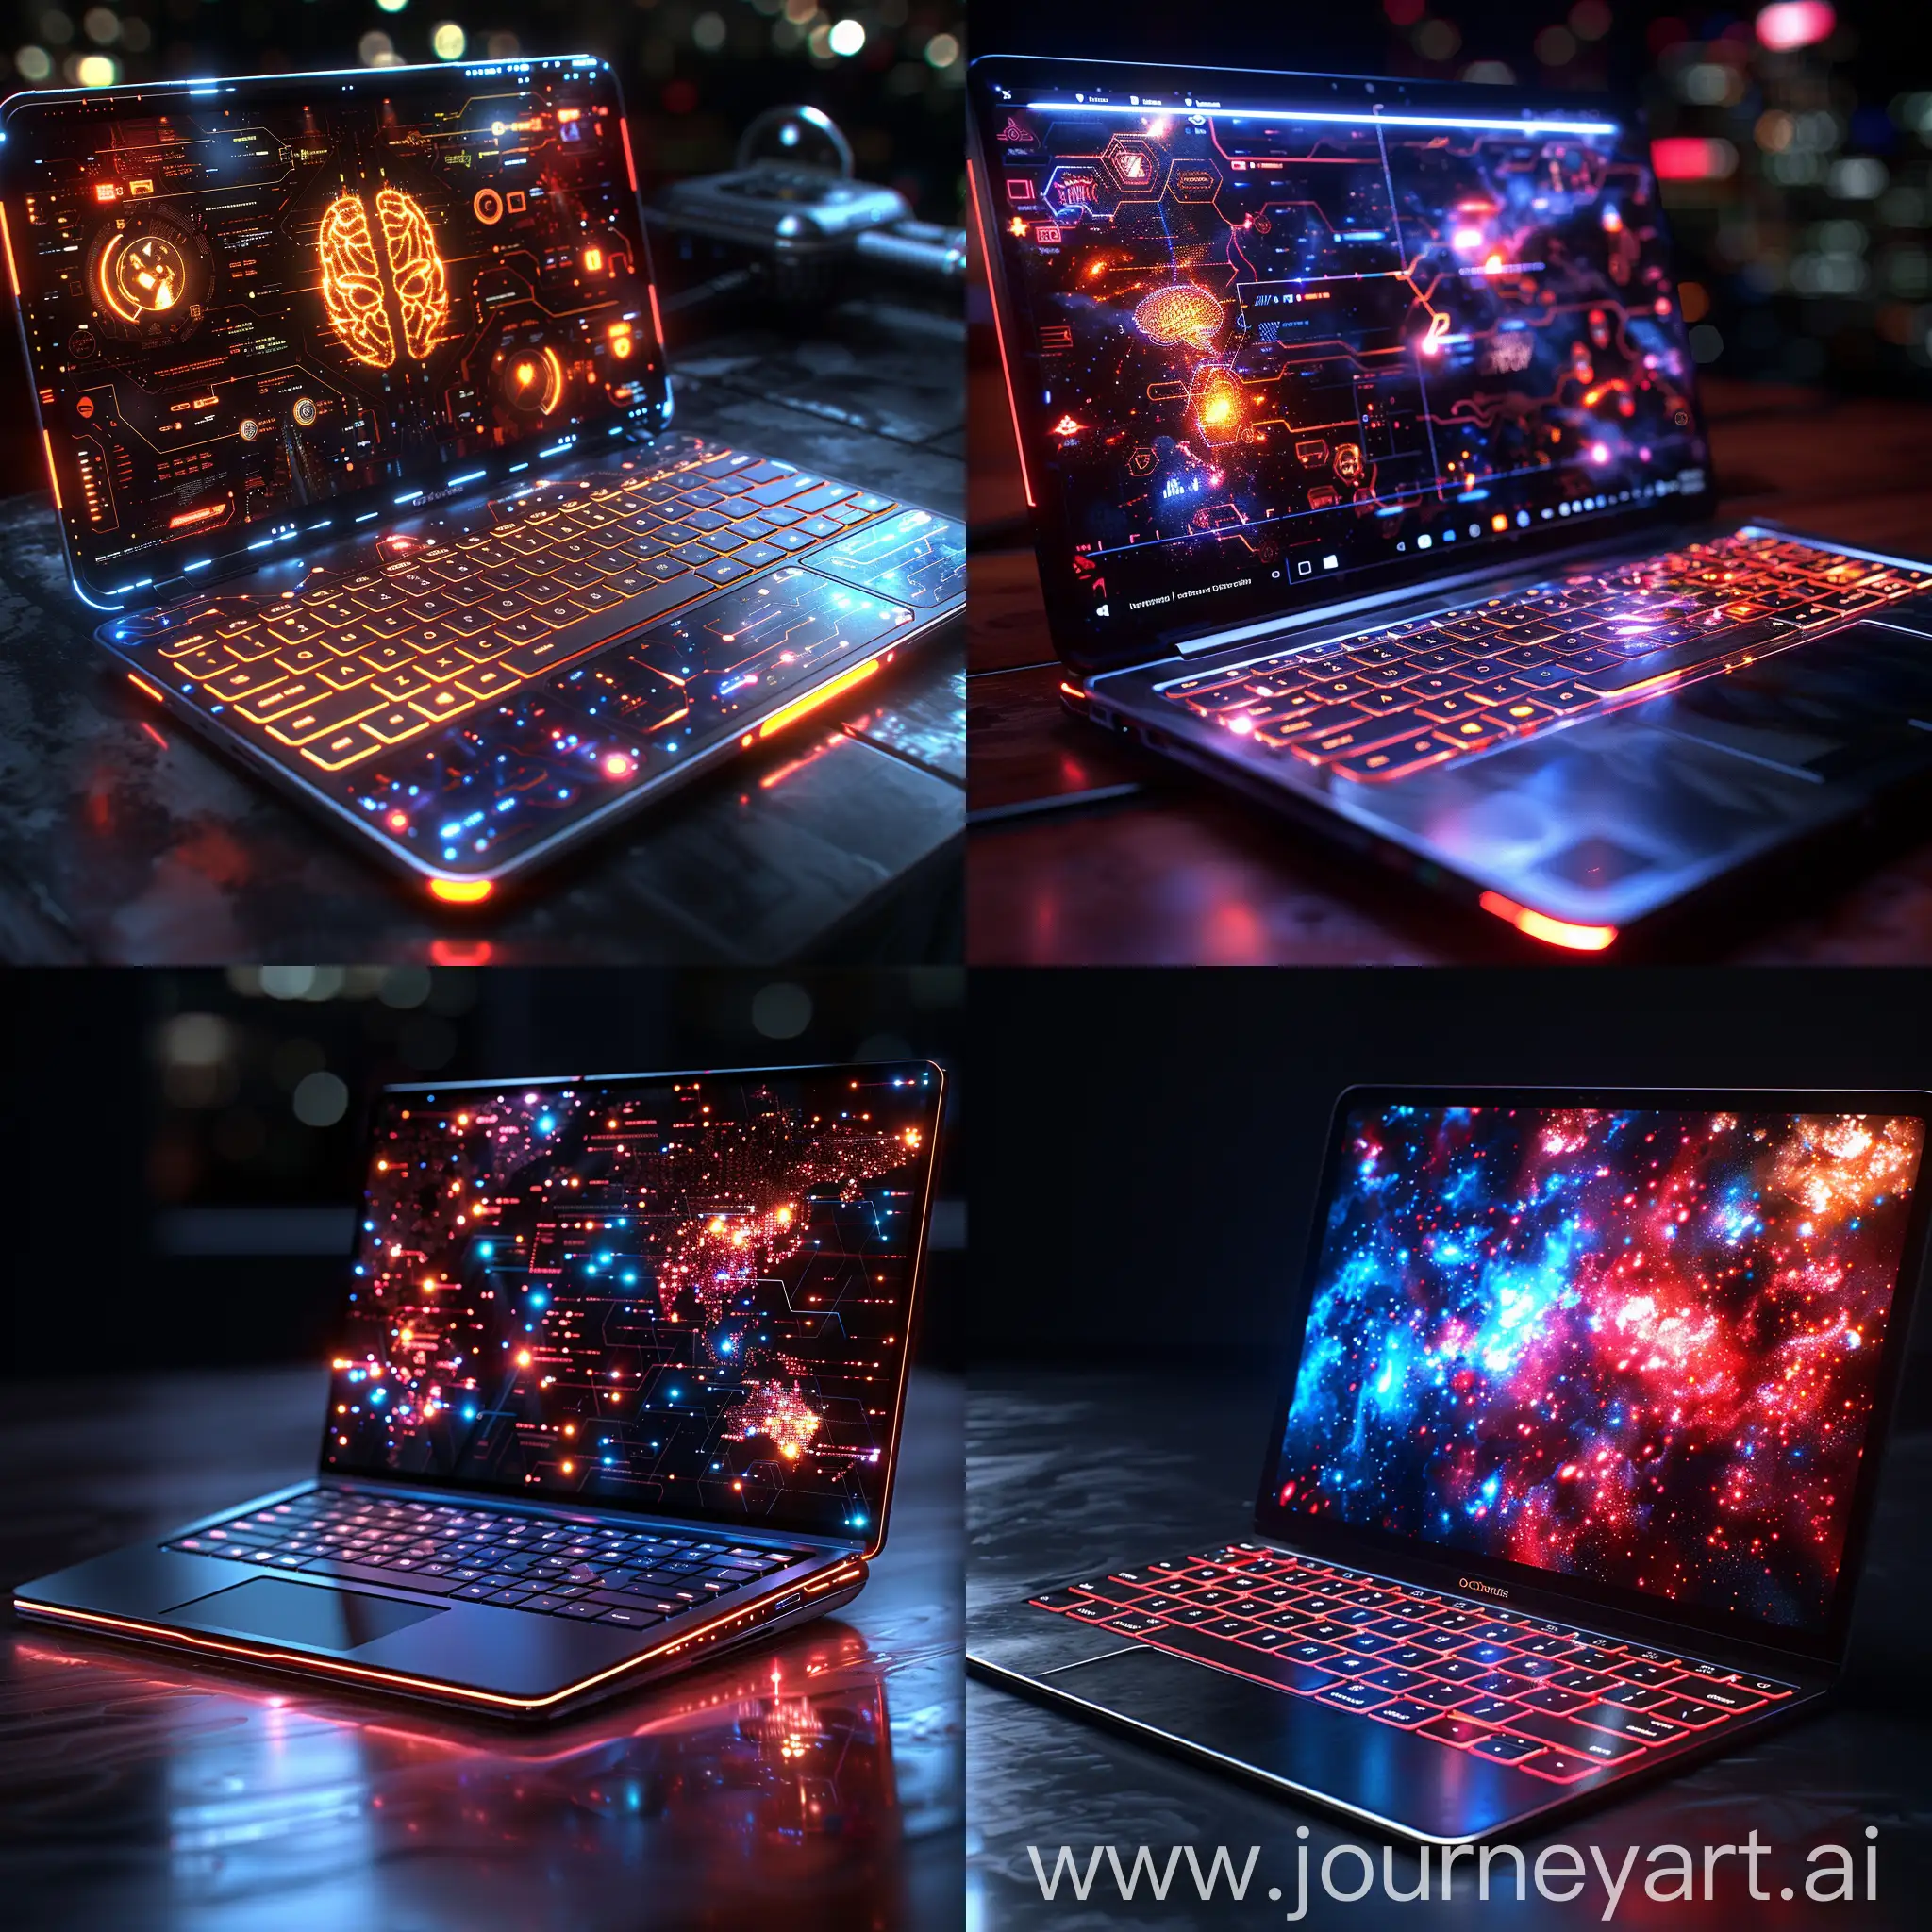 Futuristic-Laptop-with-Foldable-OLED-Displays-and-AI-Integration